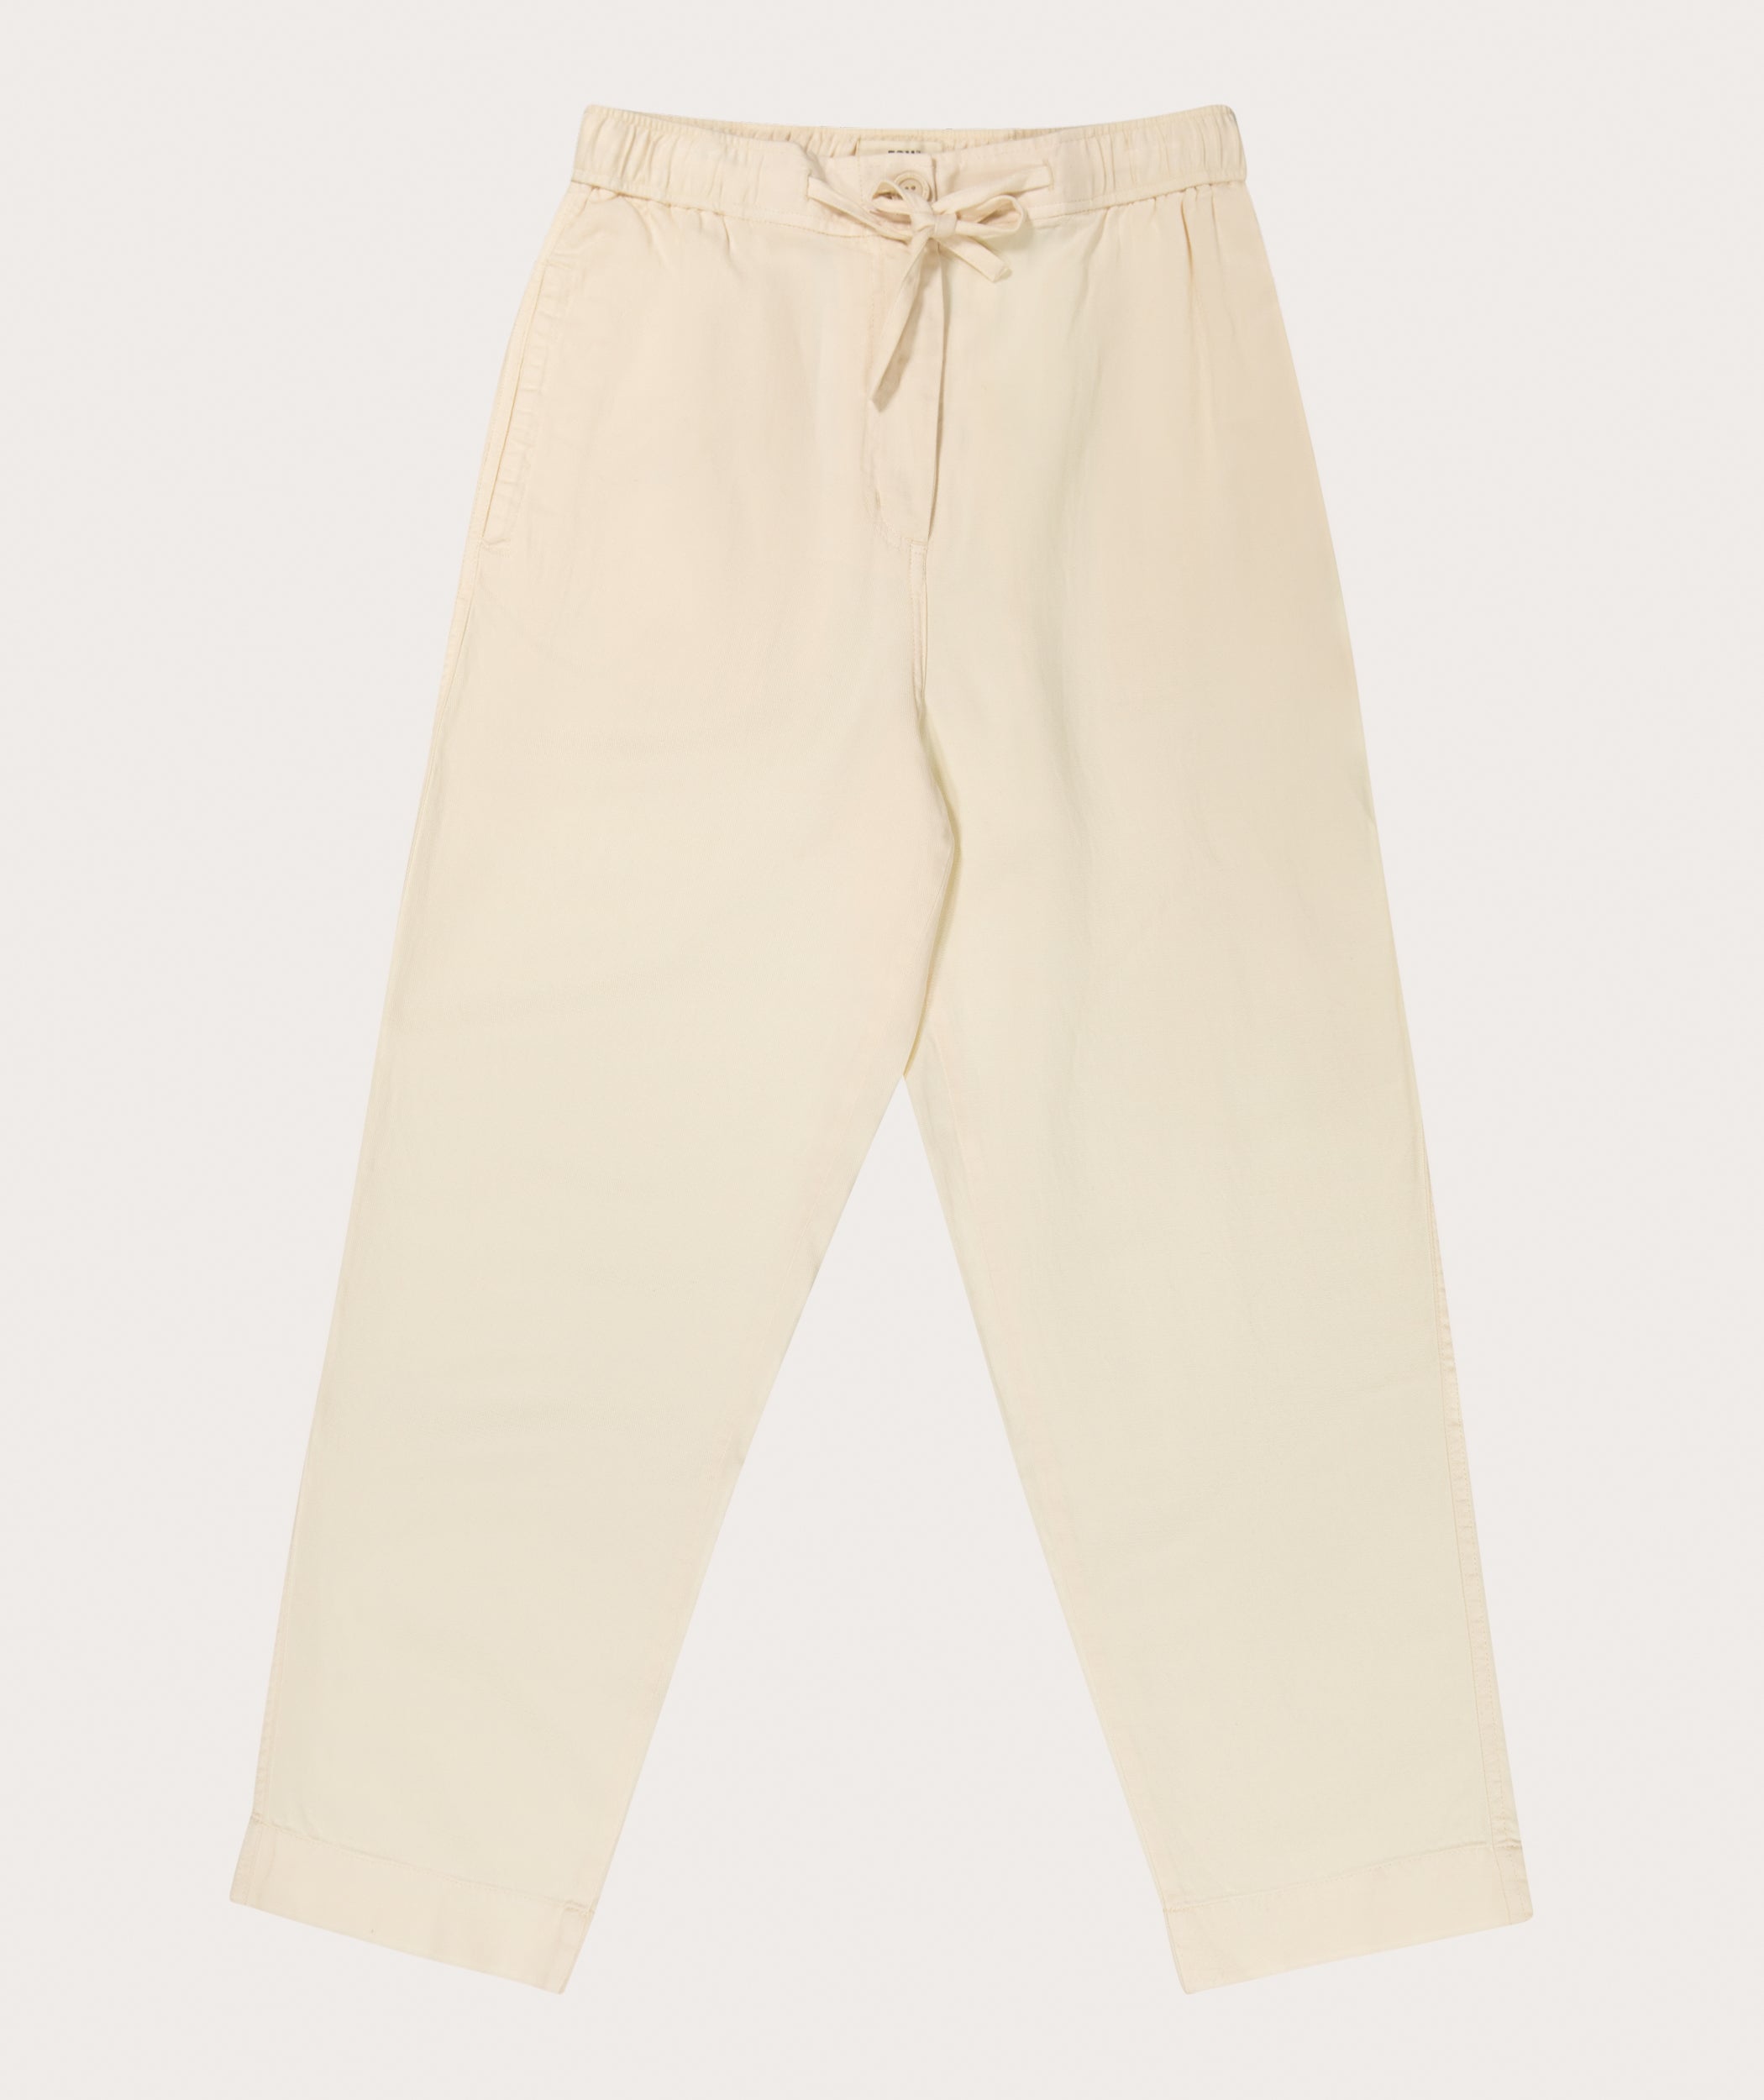 Ladies Drawstring Slouchy Trousers - Ivory